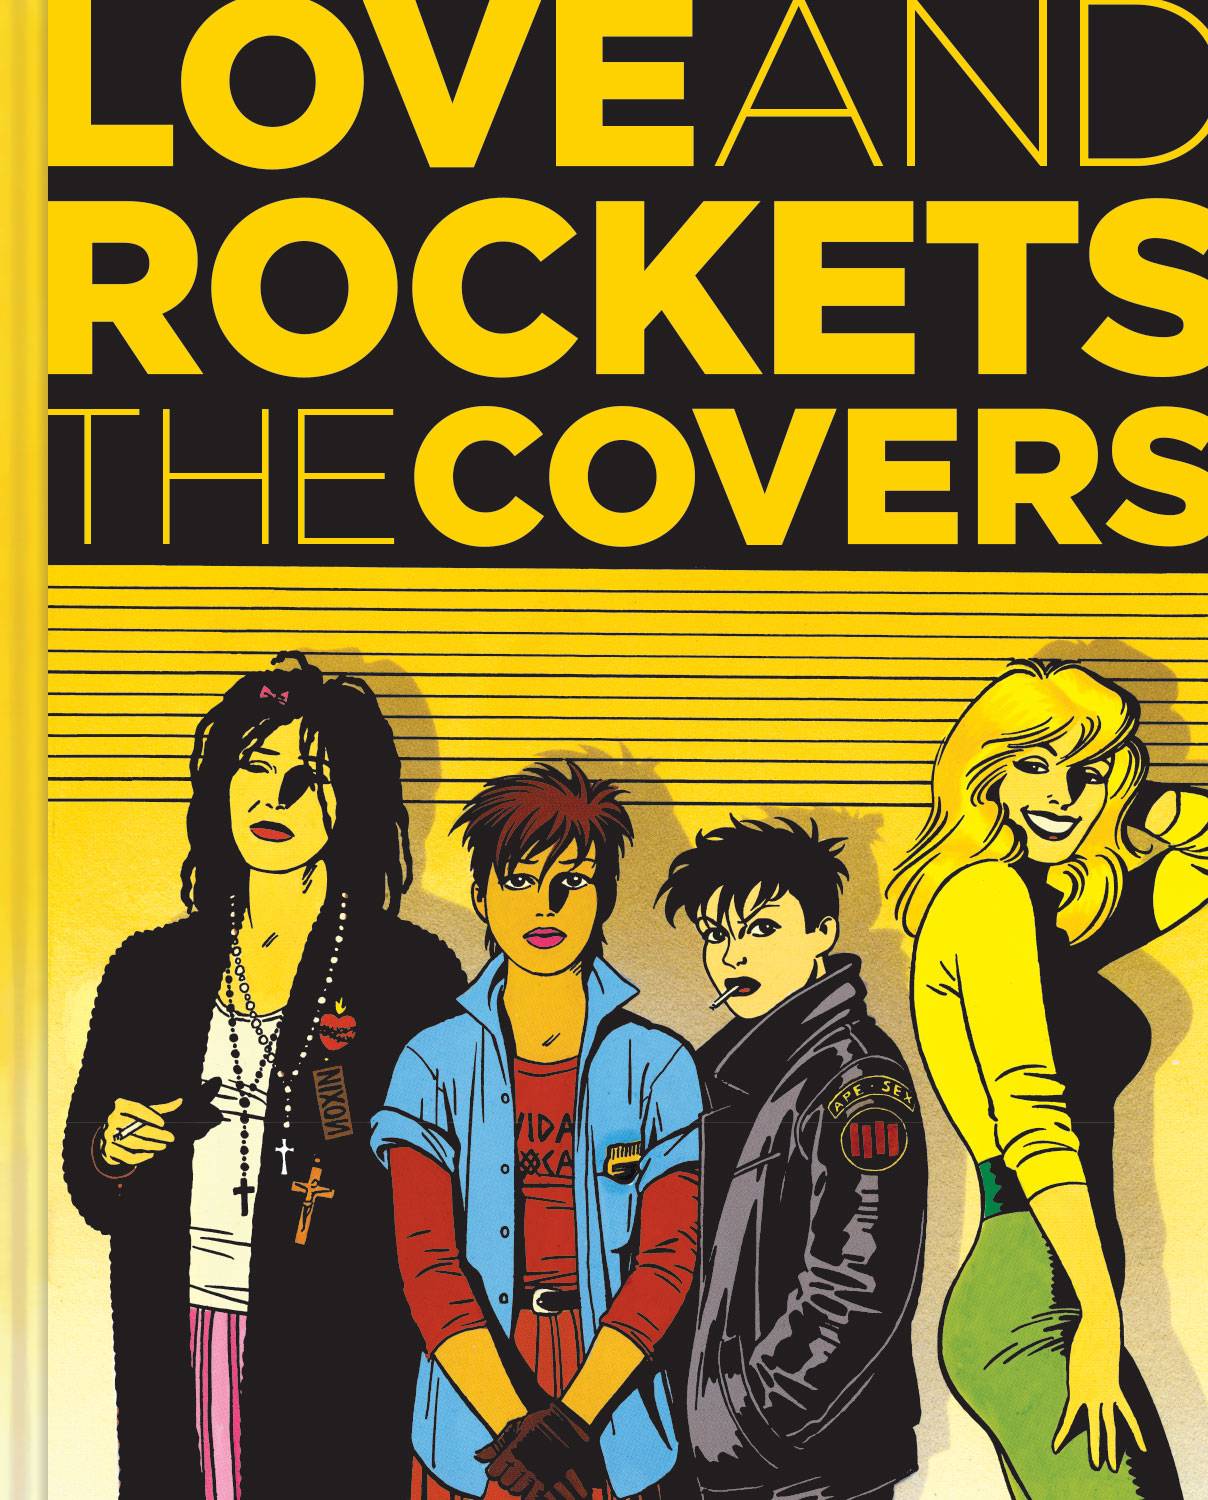 Love And Rockets The Covers Hardcover